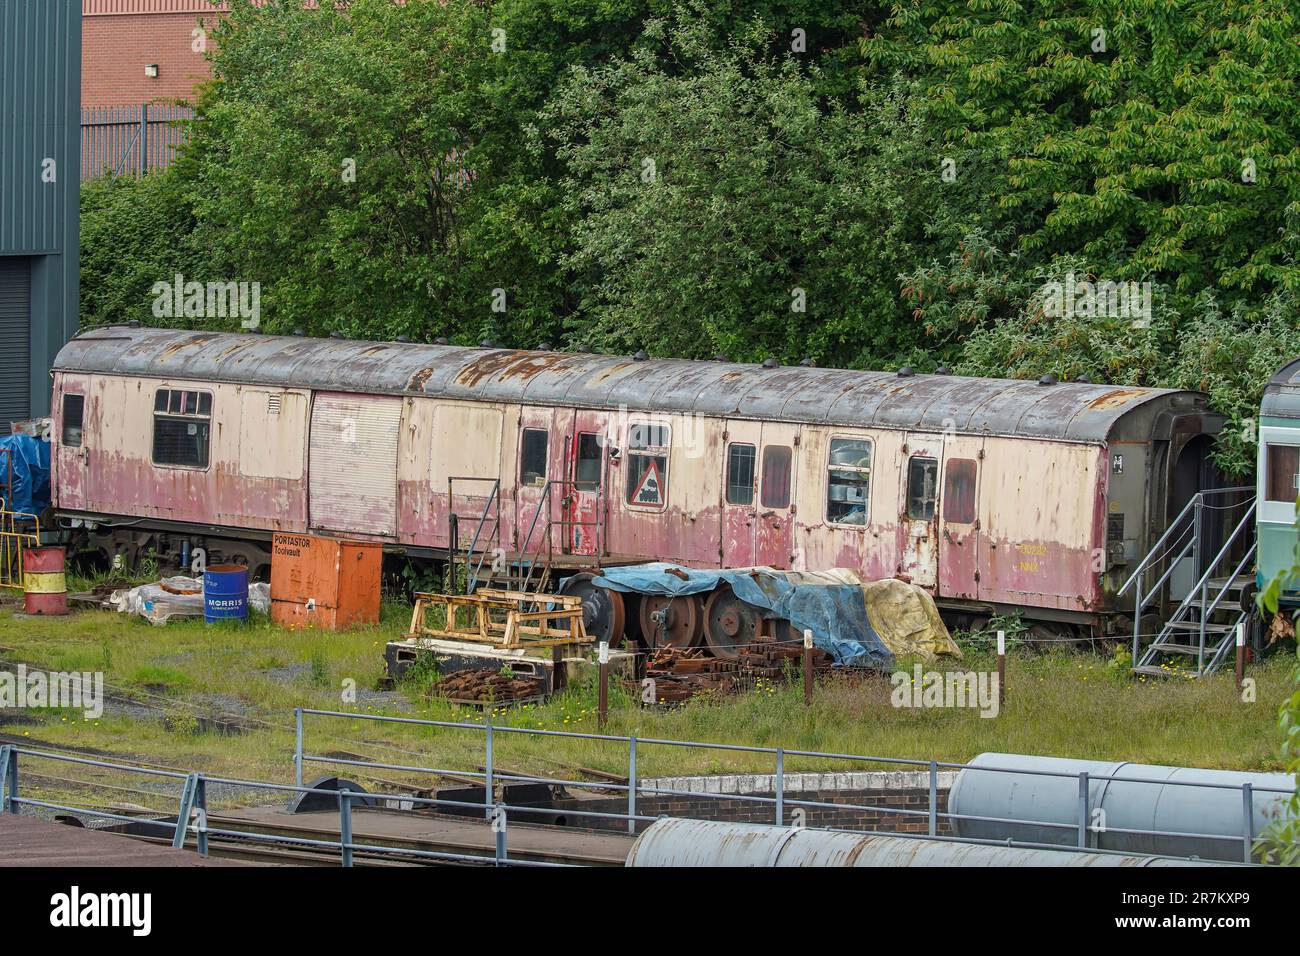 Disused railway coach in poor condition. Stock Photo